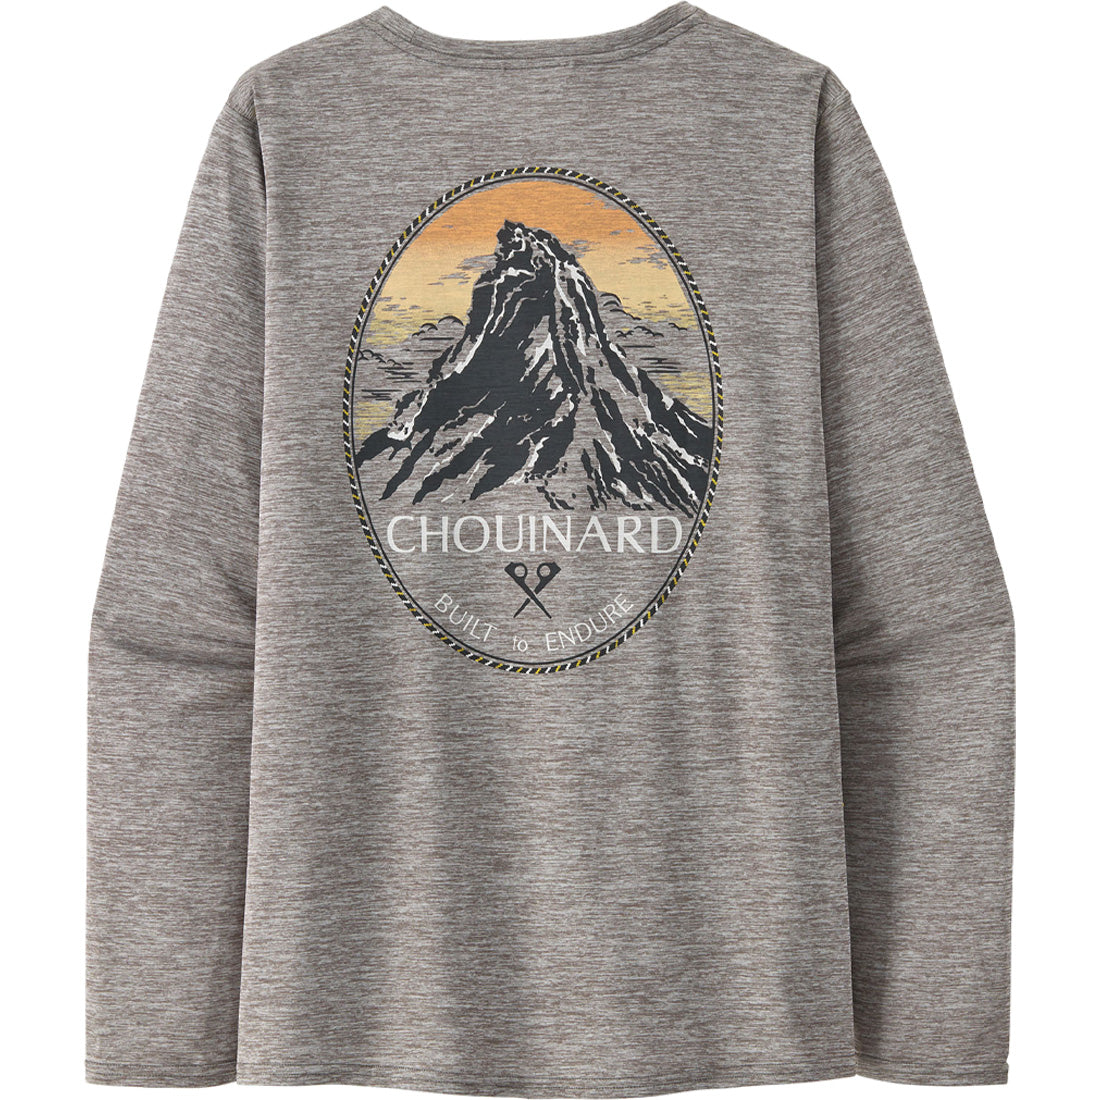 Patagonia Cap Cool Daily Graphic Long-Sleeve Shirt - Lands - Women's Chouinard Crest/Feather Grey, L